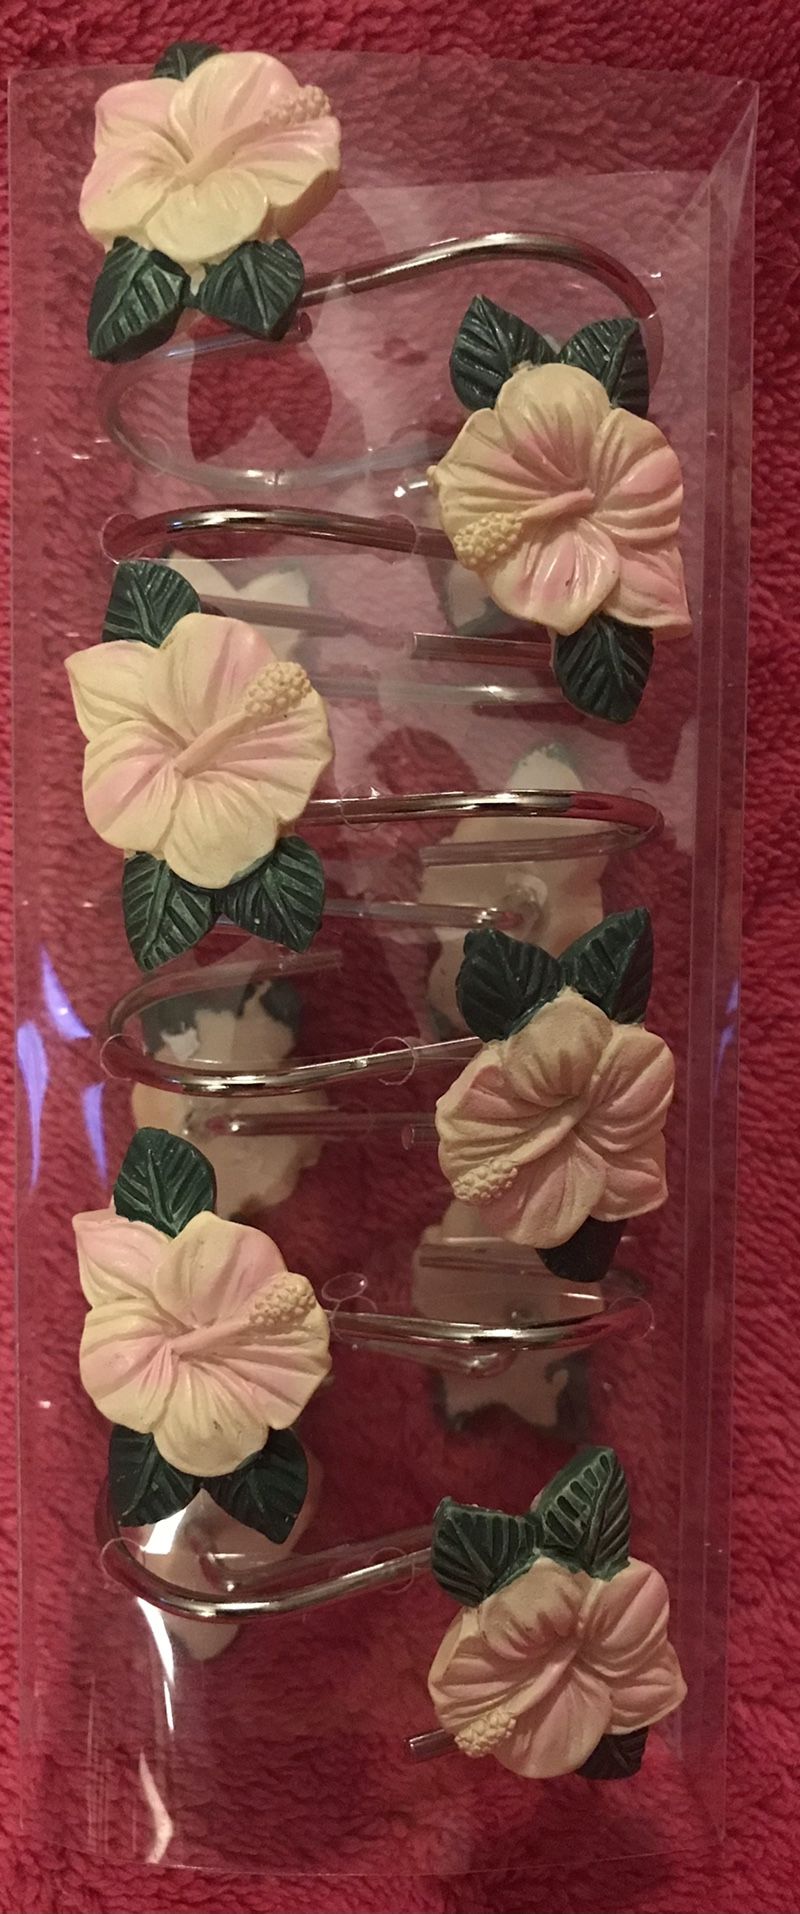 Succulent Flower Set Of 12 Ceramic & Metal Shower Curtain Hooks NEW in Package!